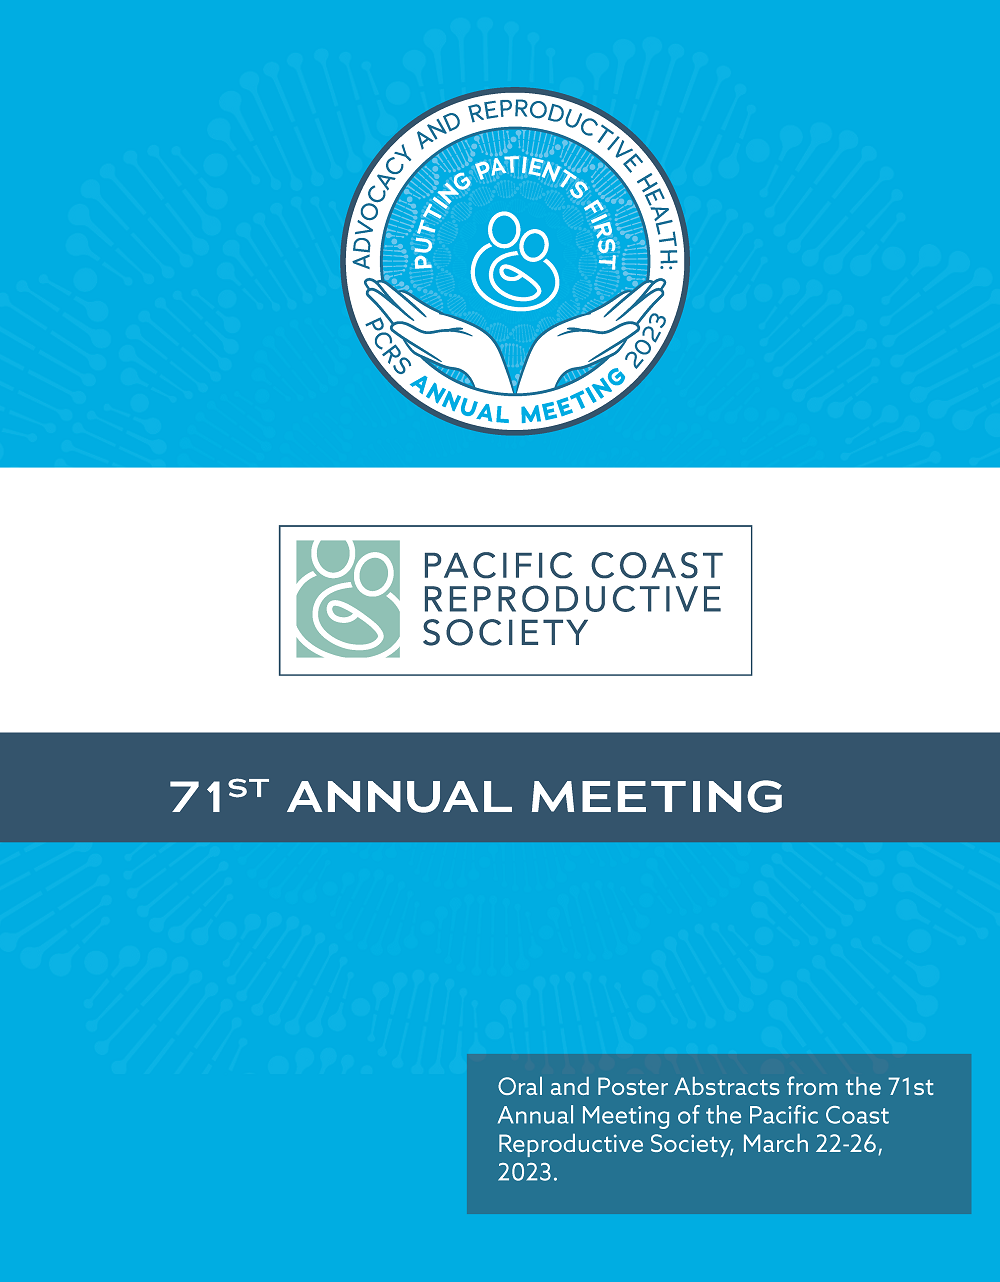 2023 Annual Meeting Abstracts